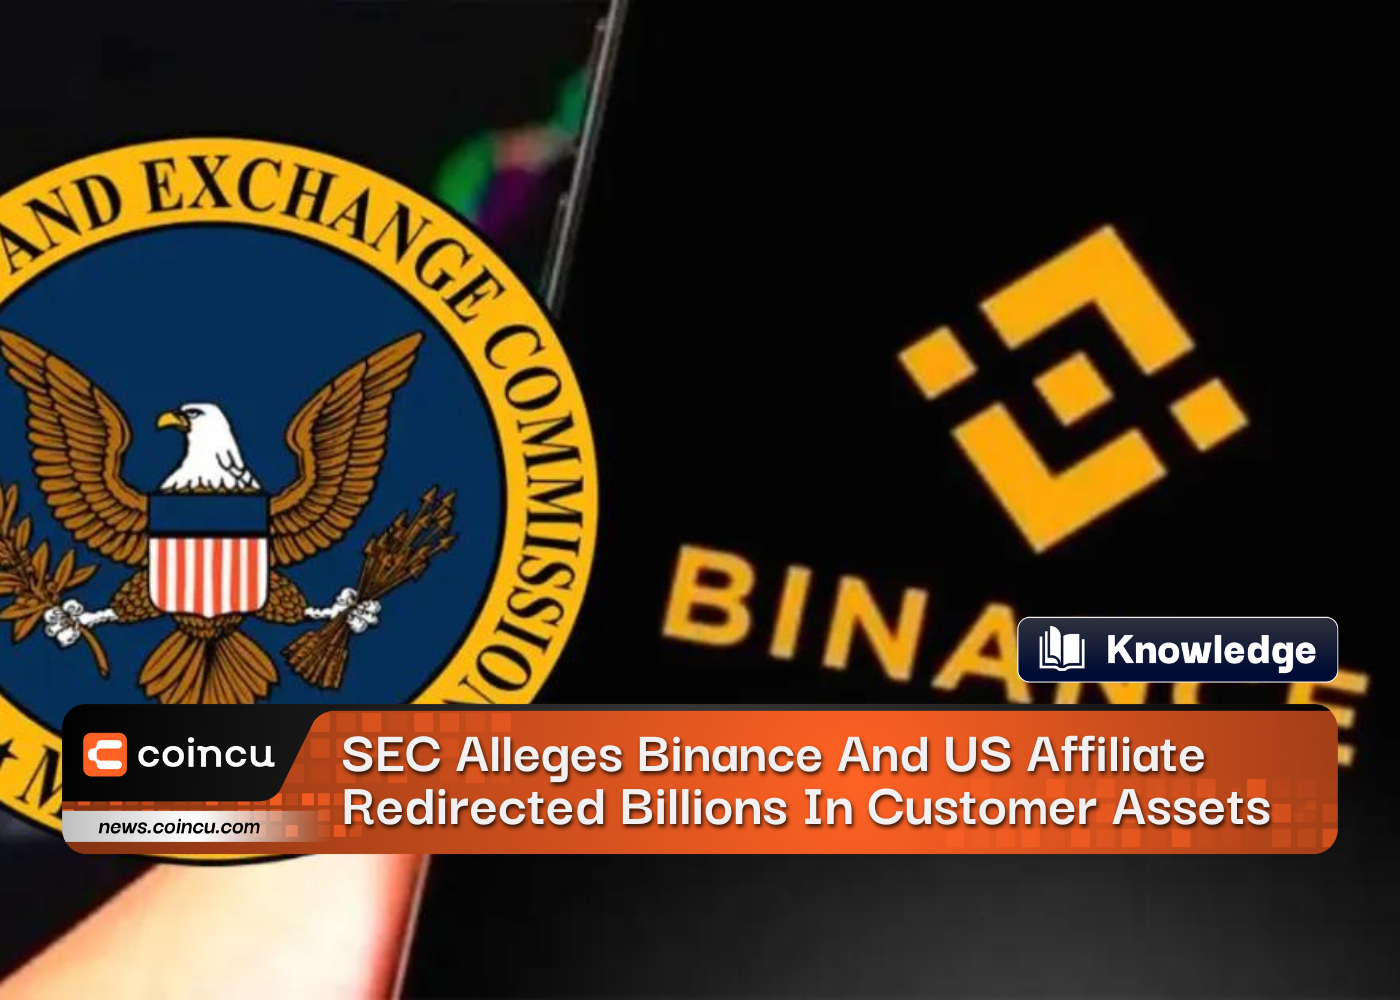 SEC Alleges Binance And US Affiliate